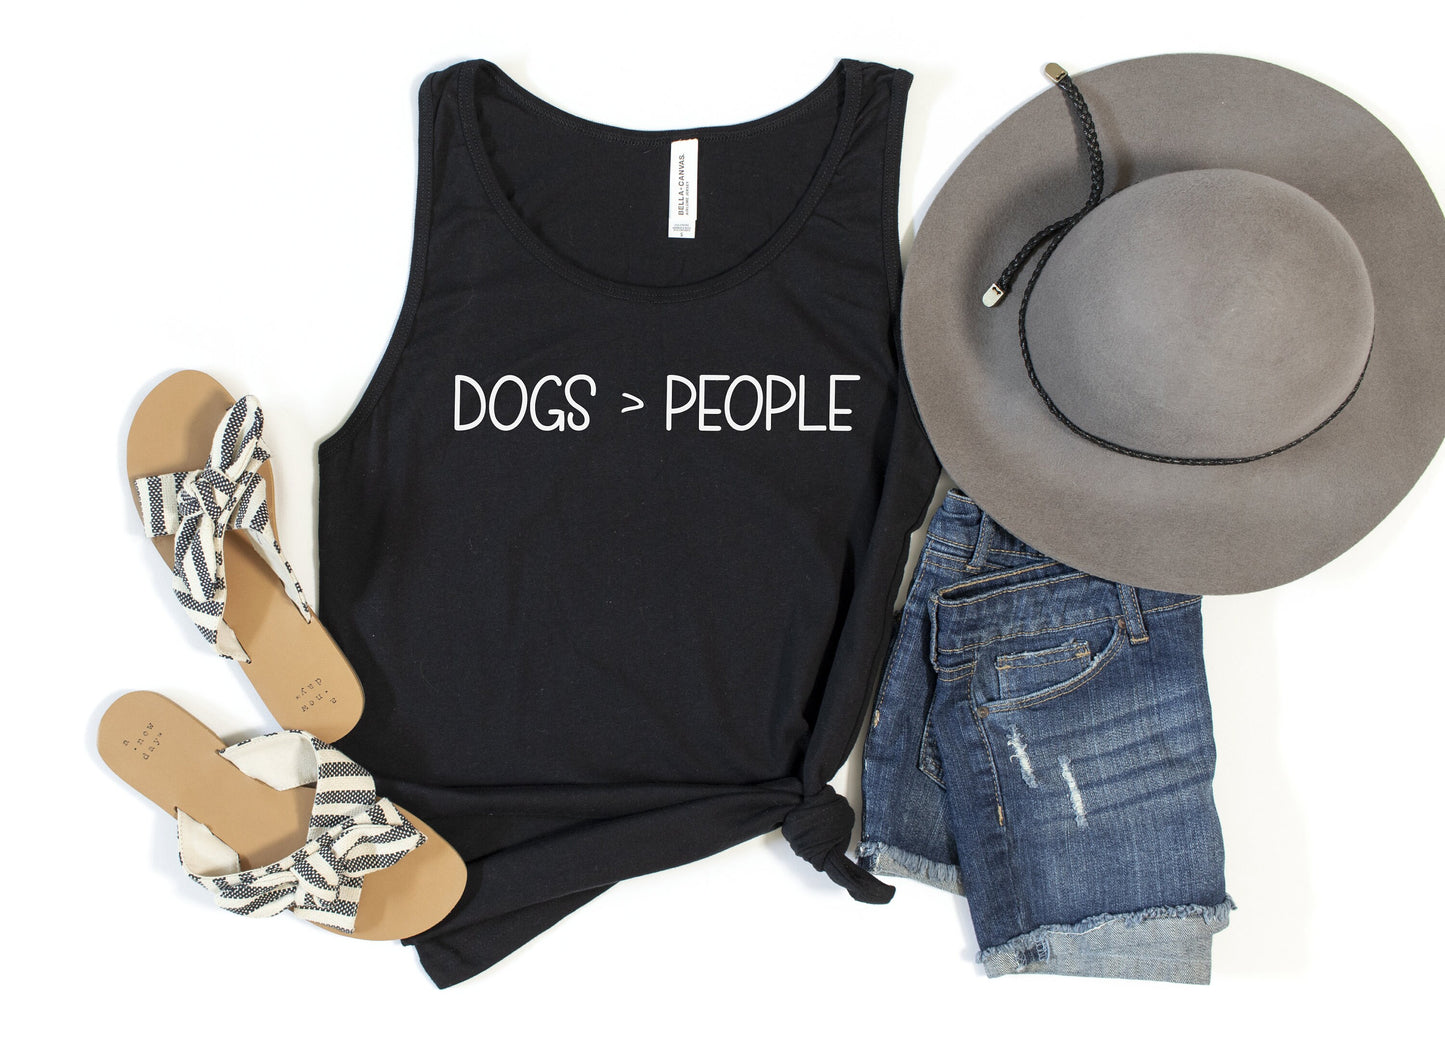 Dogs > People Tank Top